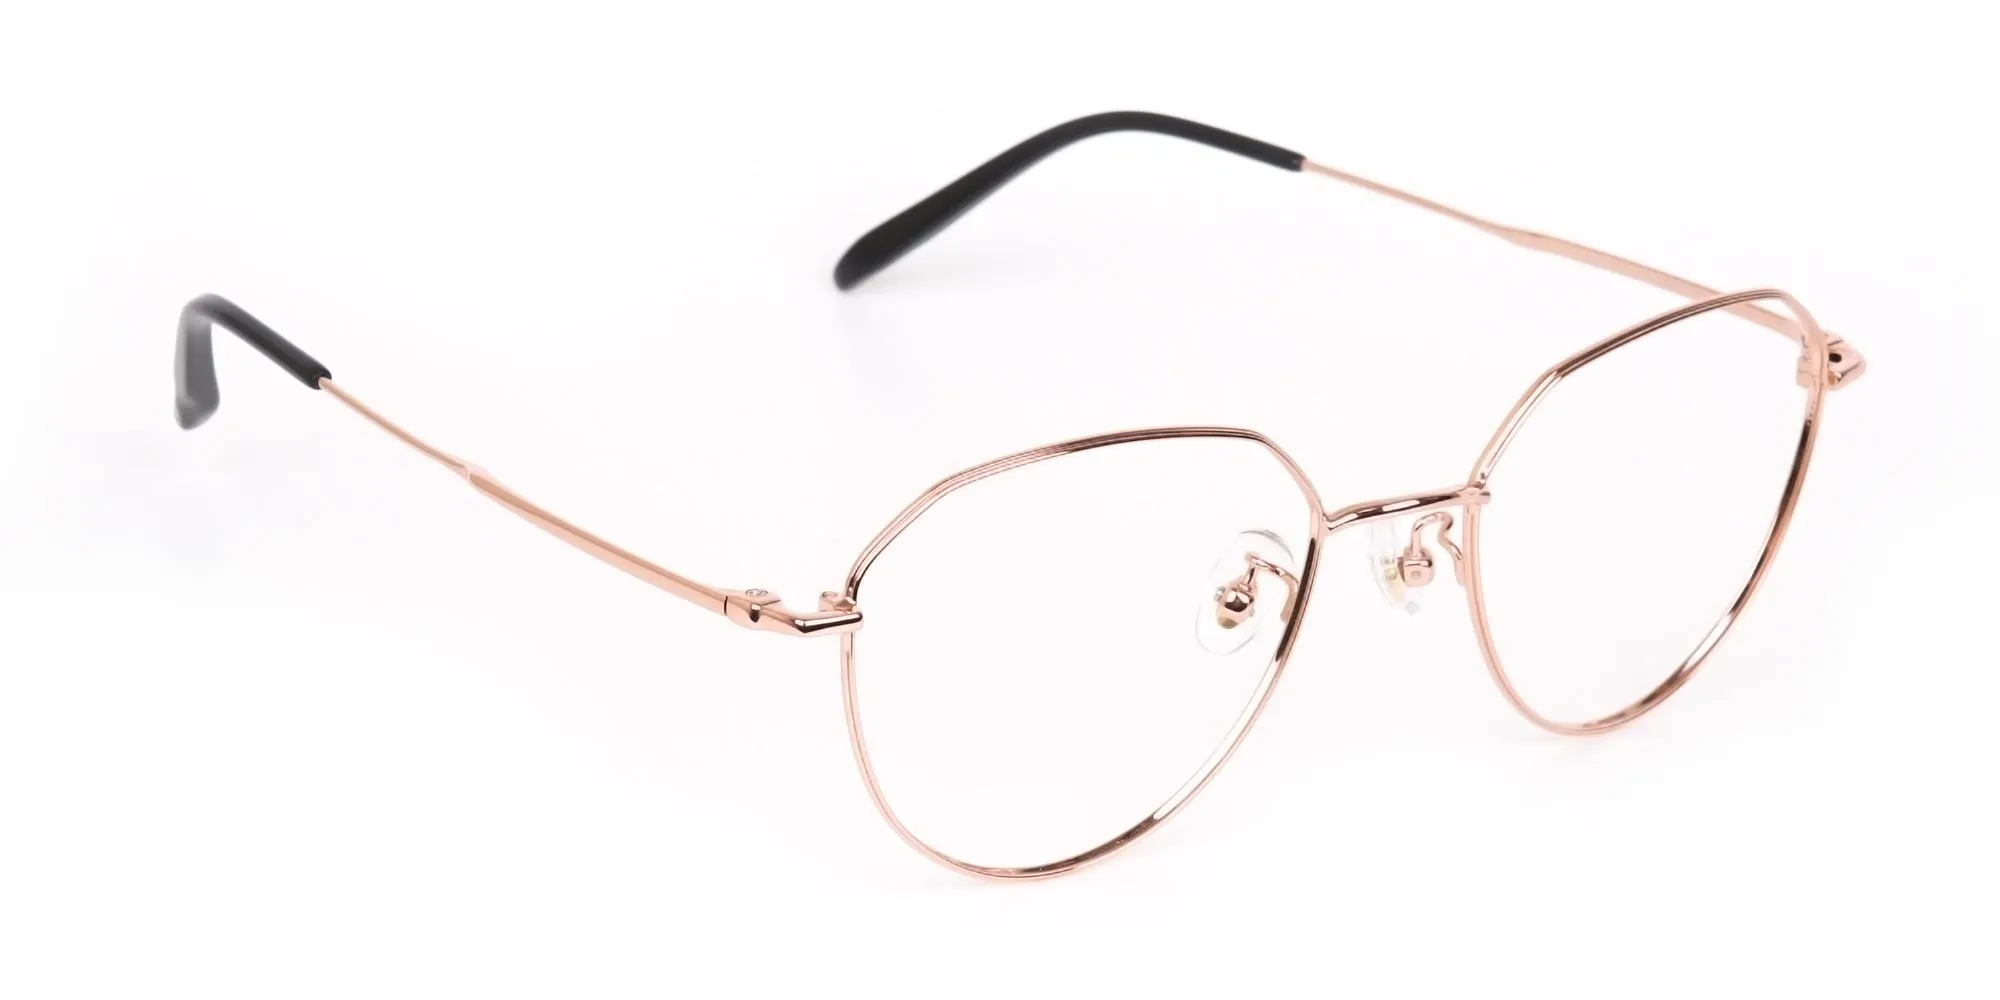 CROWTON 4 - Rose Gold Aviator Glasses in Metal Frame Unisex | Specscart.®